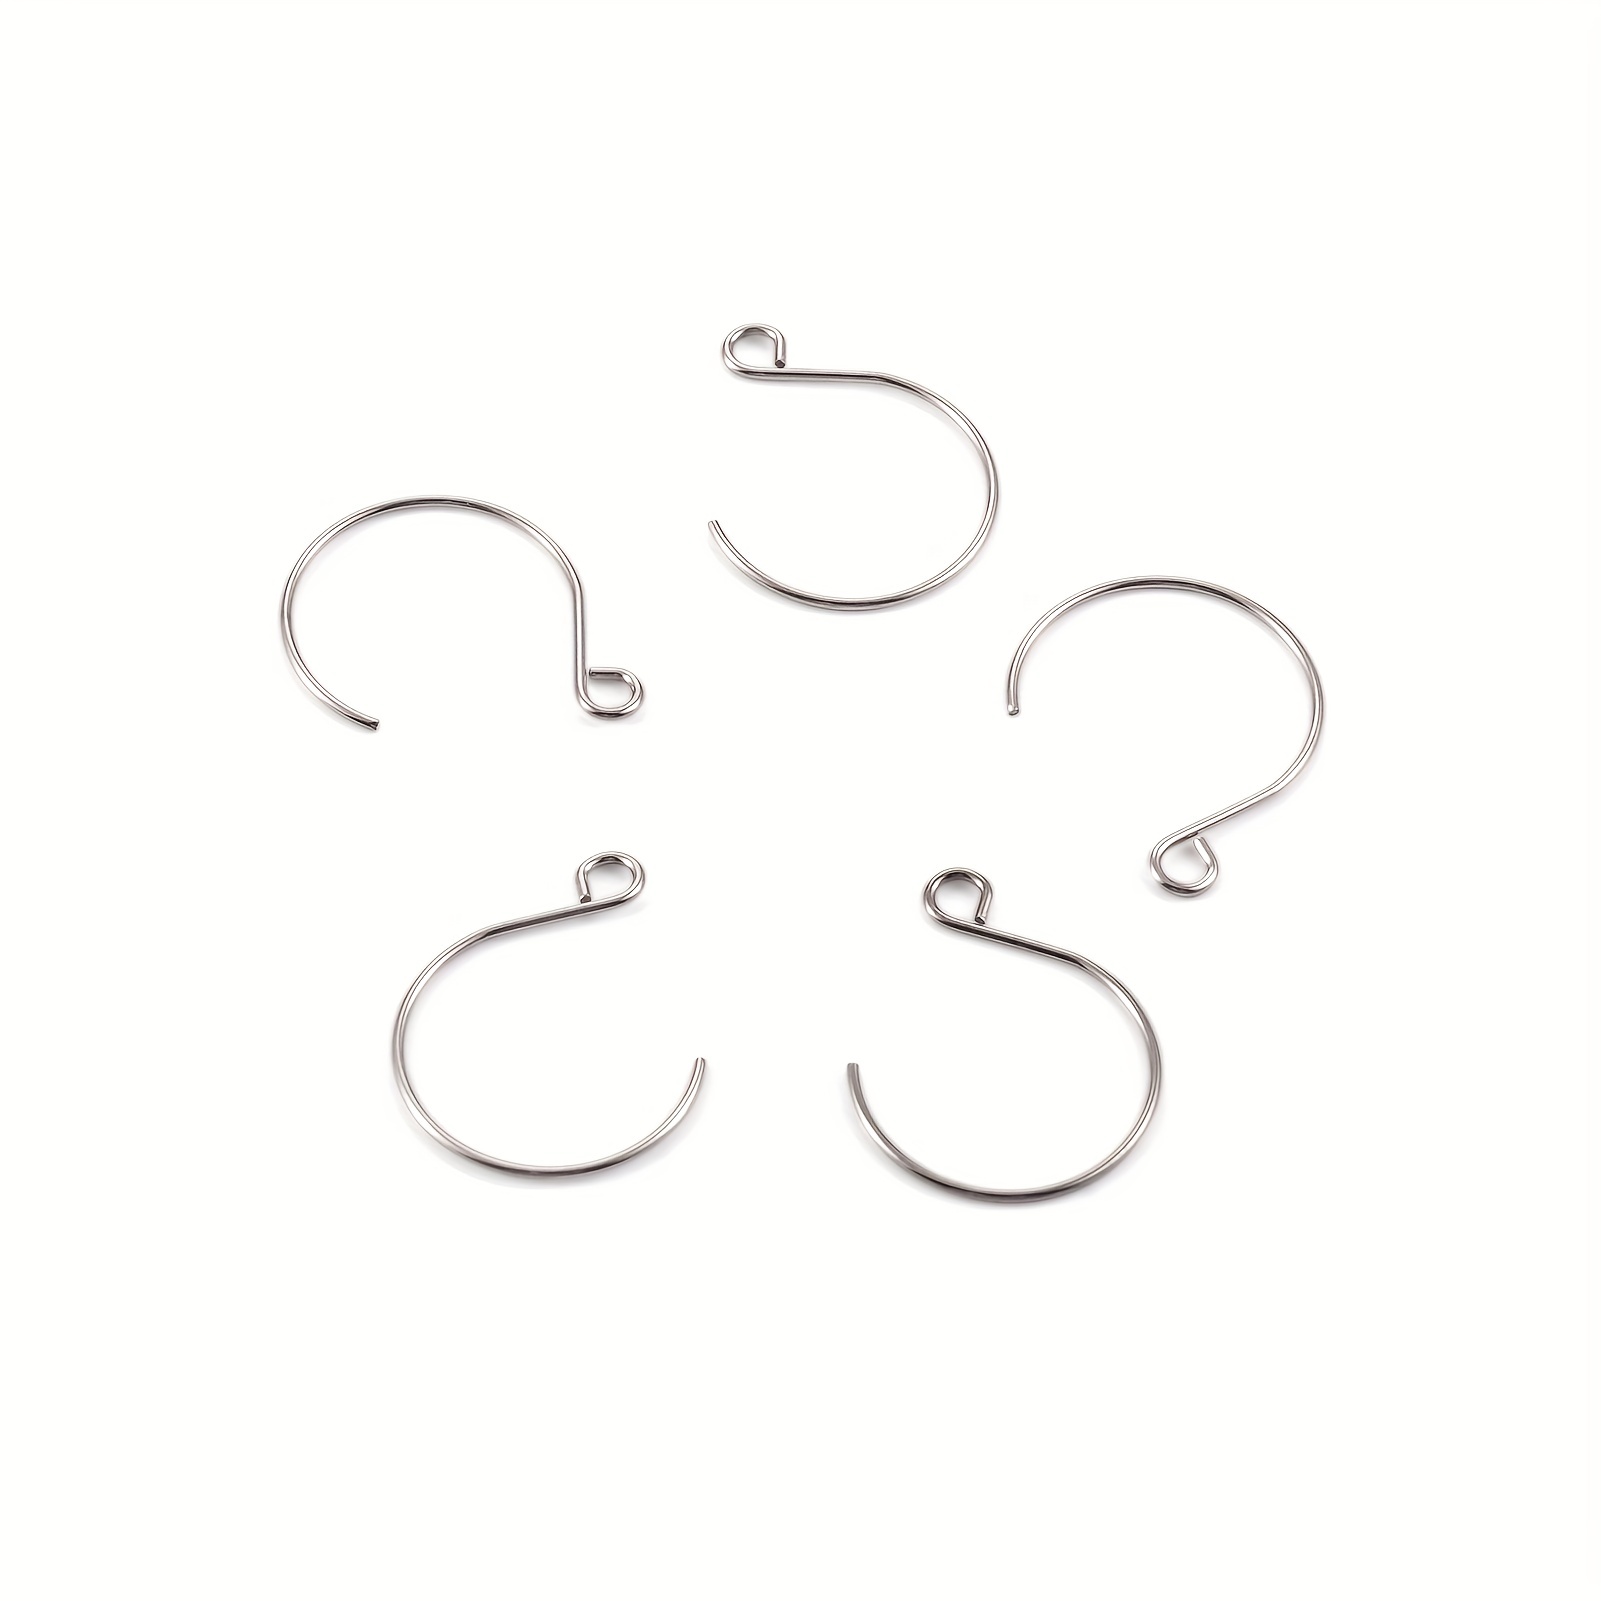 200pcs Stainless Steel French Earring Hooks Fish Hook Ear Wires